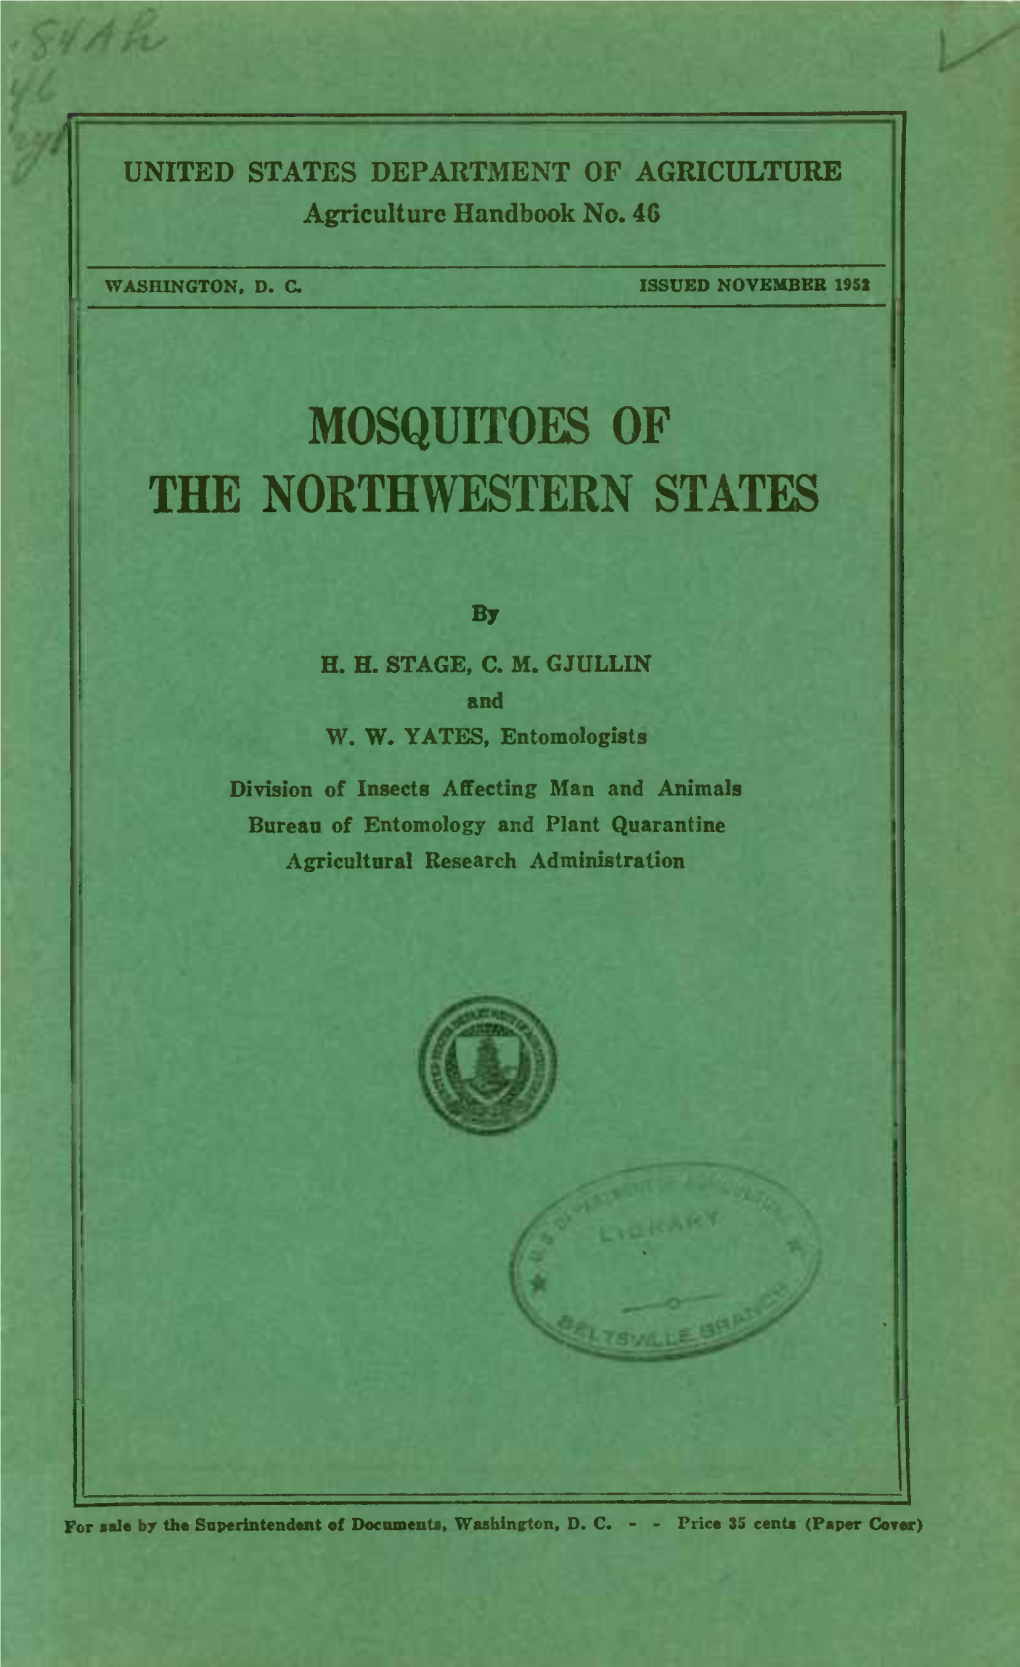 Mosquitoes of the Northwestern States